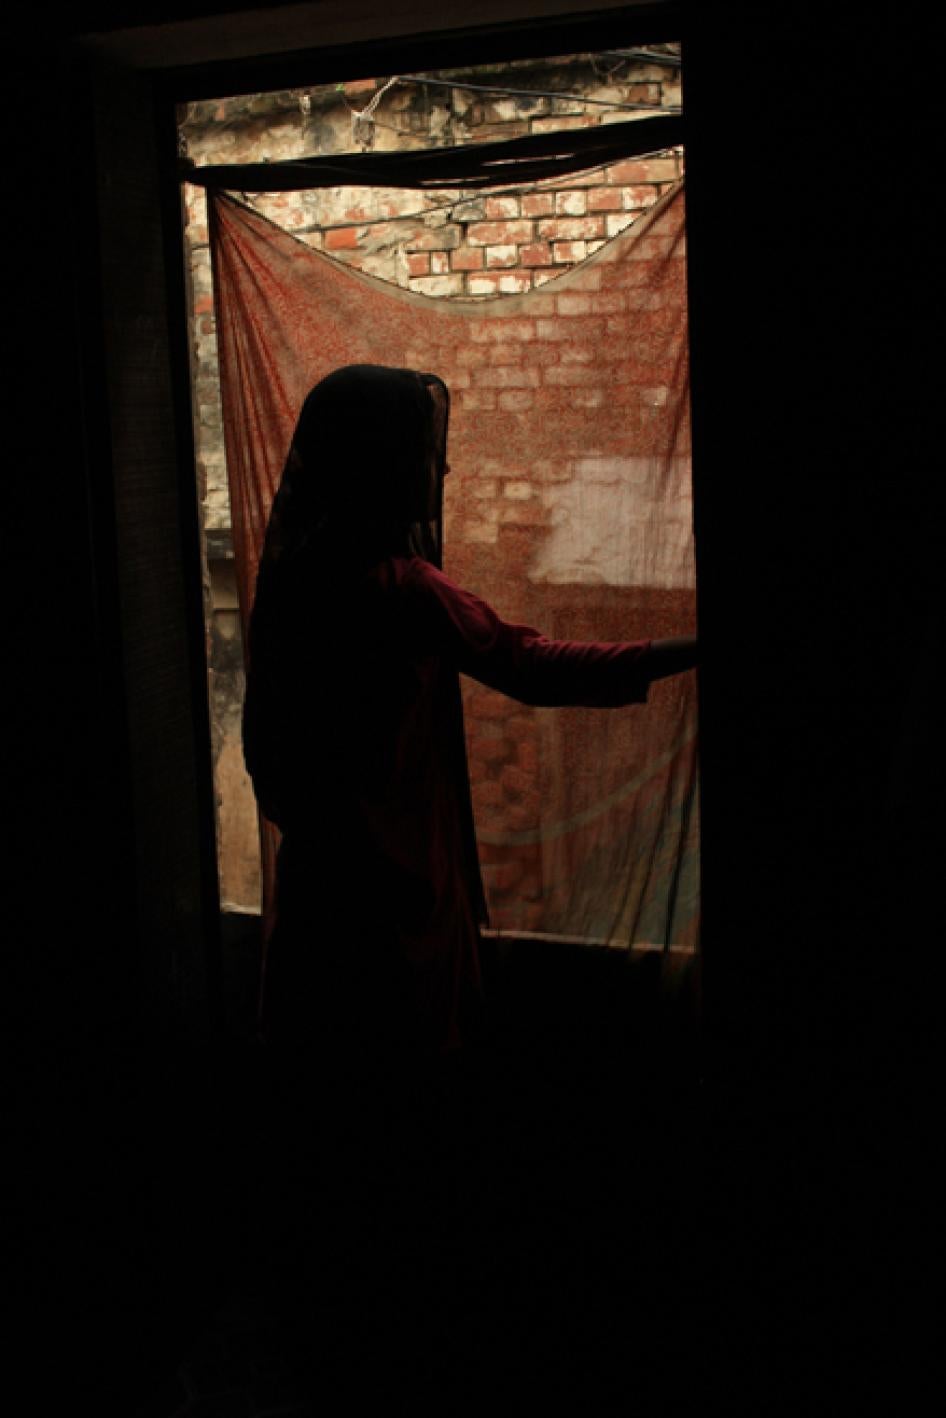 South Asia Failing to Address Its Child Rape Problem Human Rights Watch